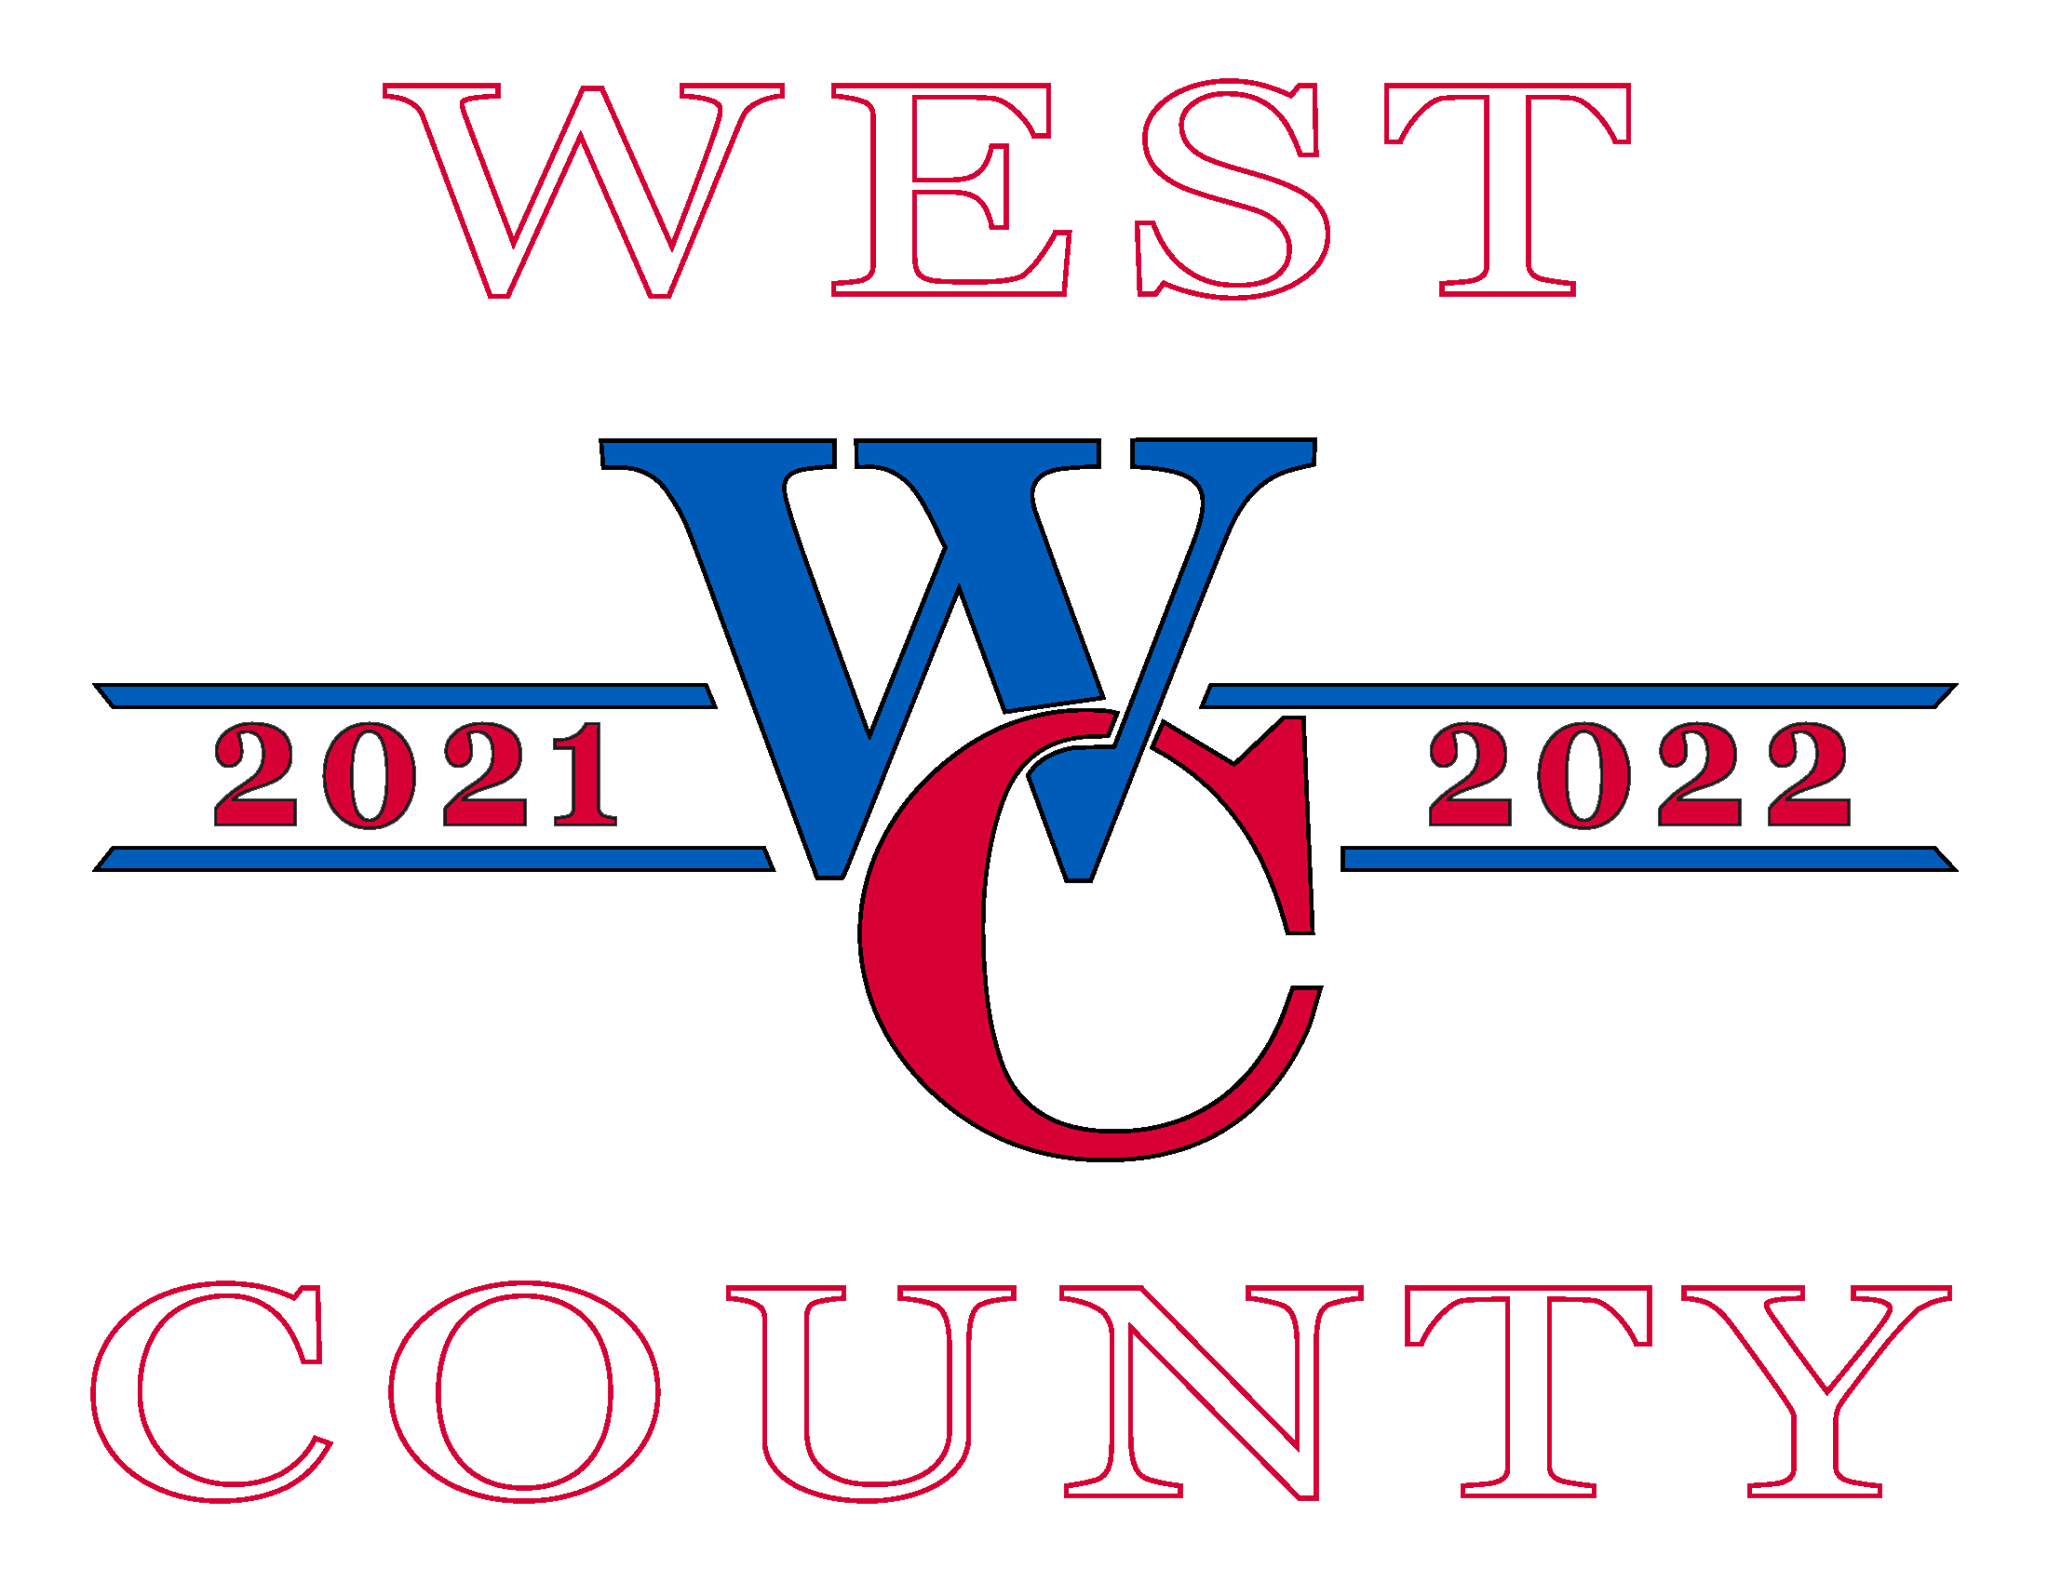 west-county-high-logo-photo-courtesy-of-west-county-highs-facebook-page